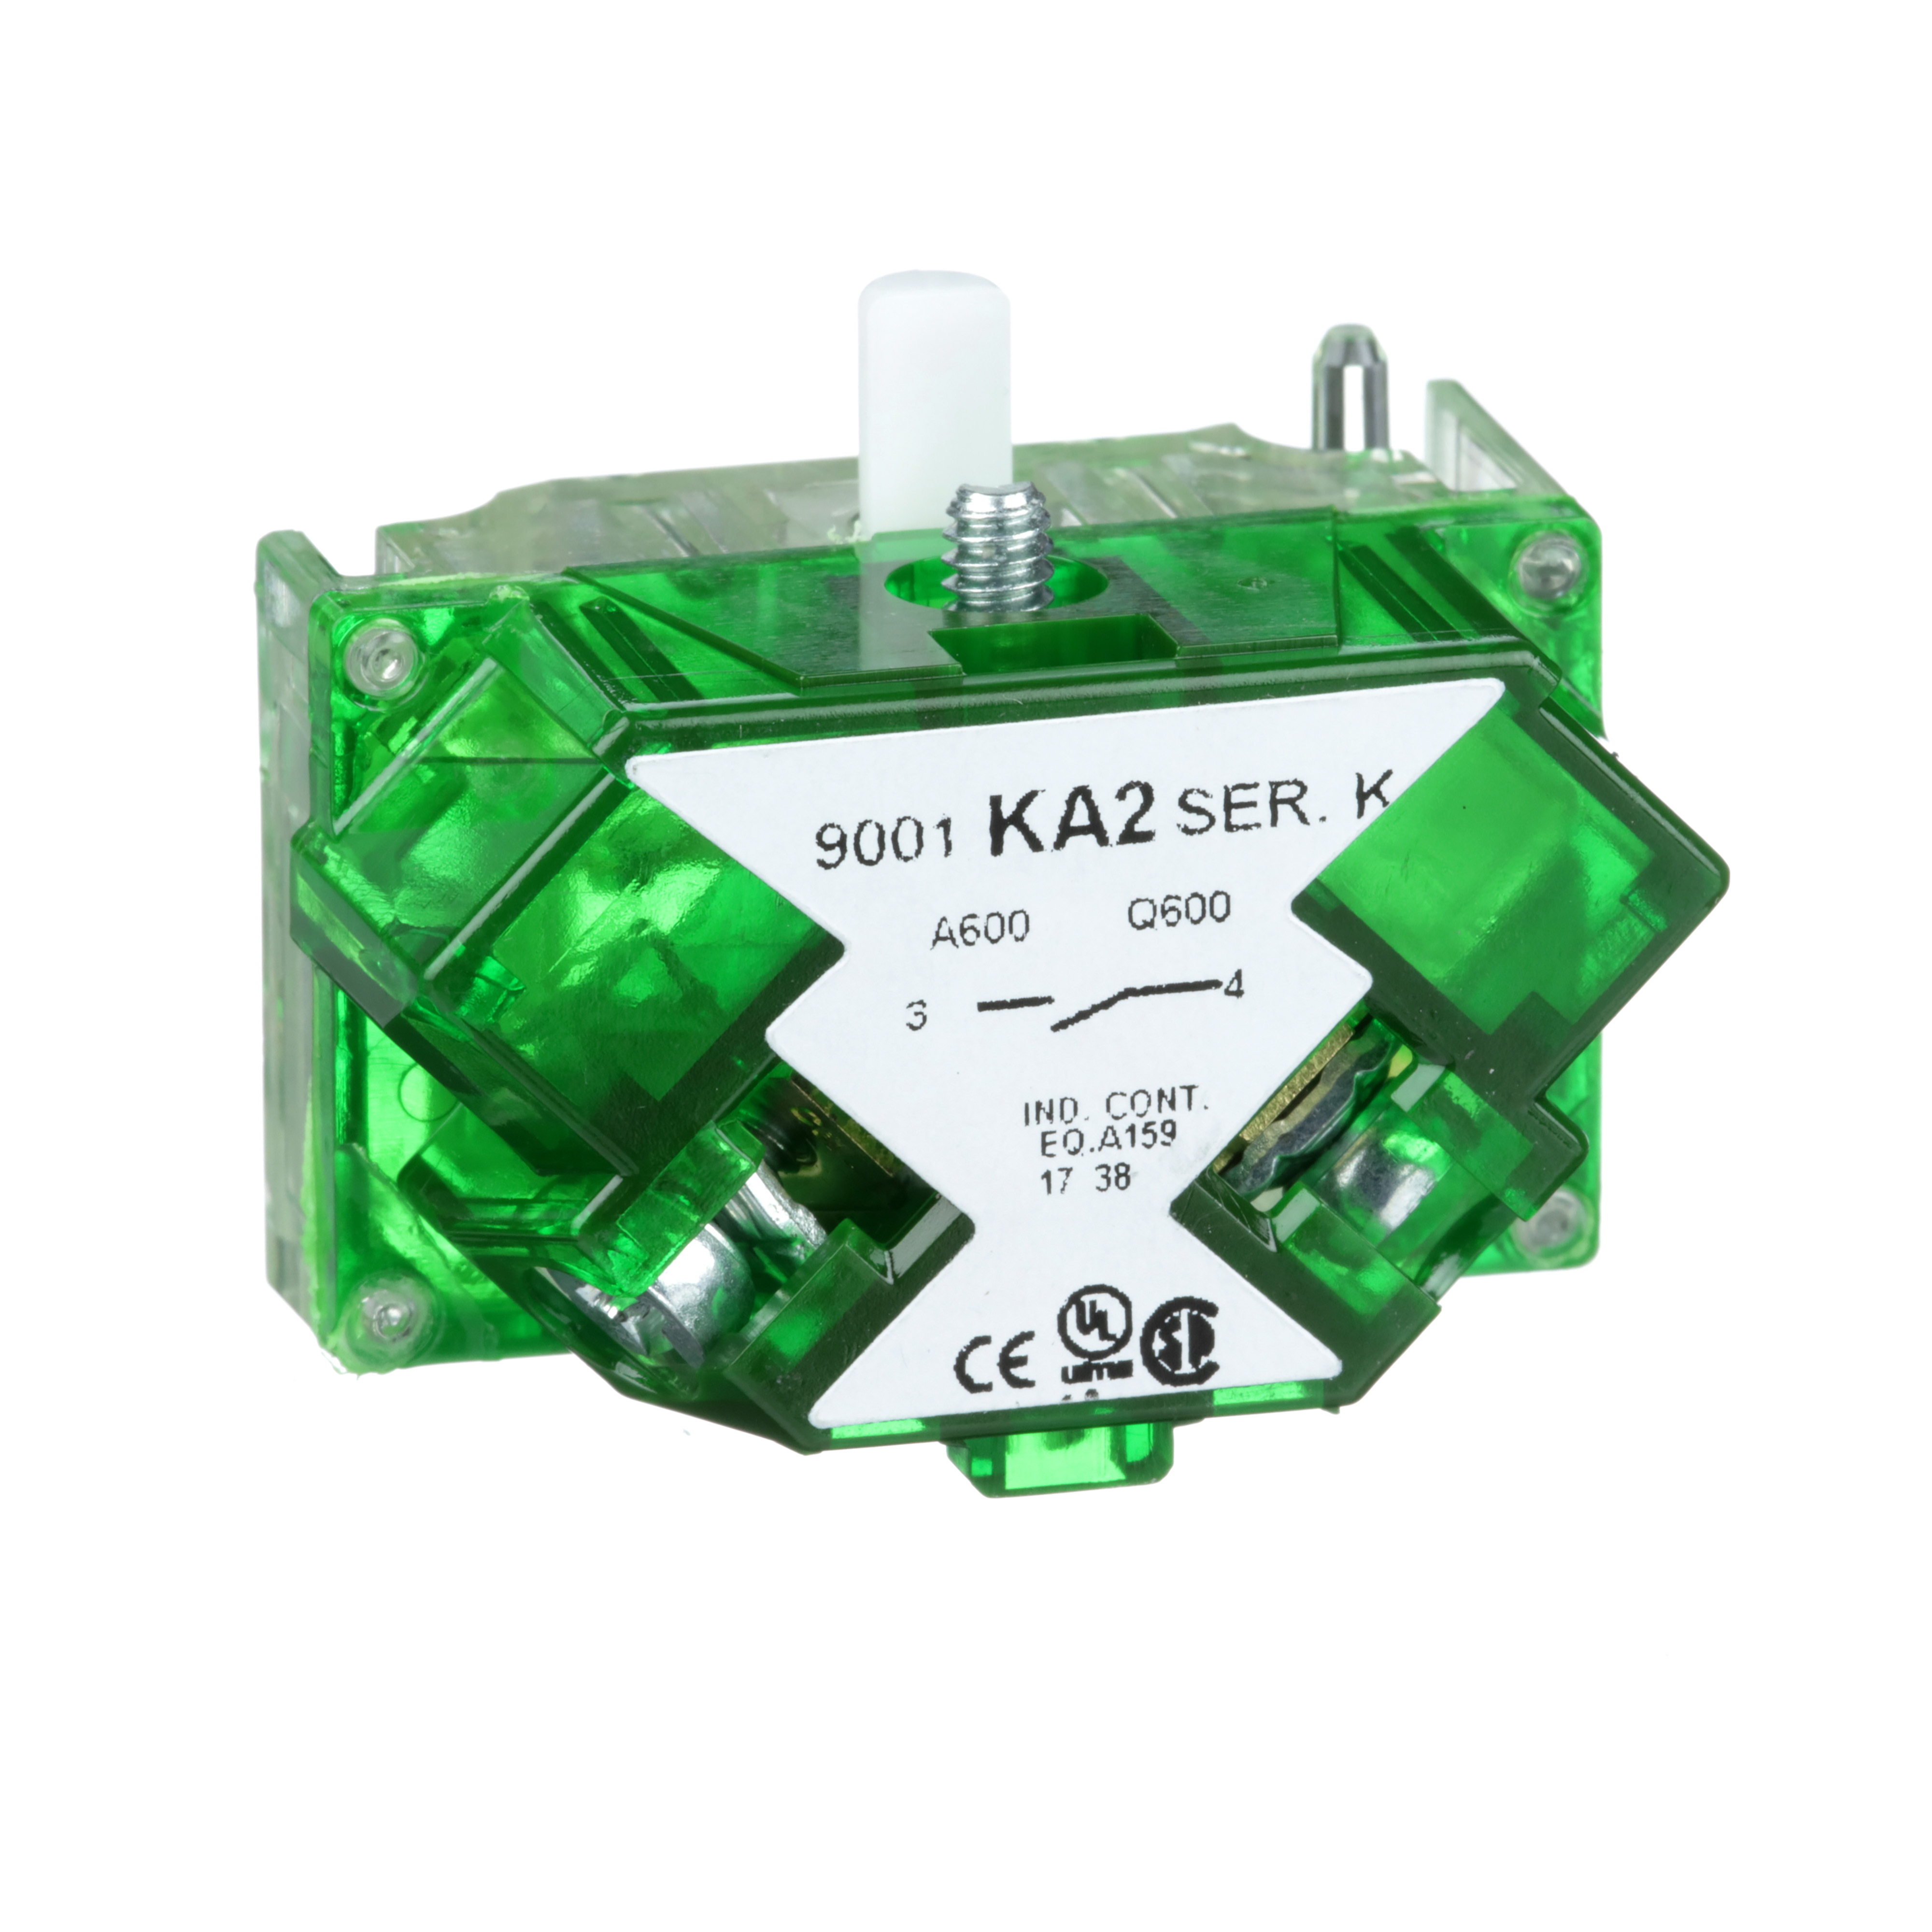 Square D™ Harmony™ 9001KA2 Finger Safe Standard Contact Block, 30 mm, 1NO Contact, 10 A, 600 VAC Contact, Silver Alloy Contact, Momentary Action, Clear/Green